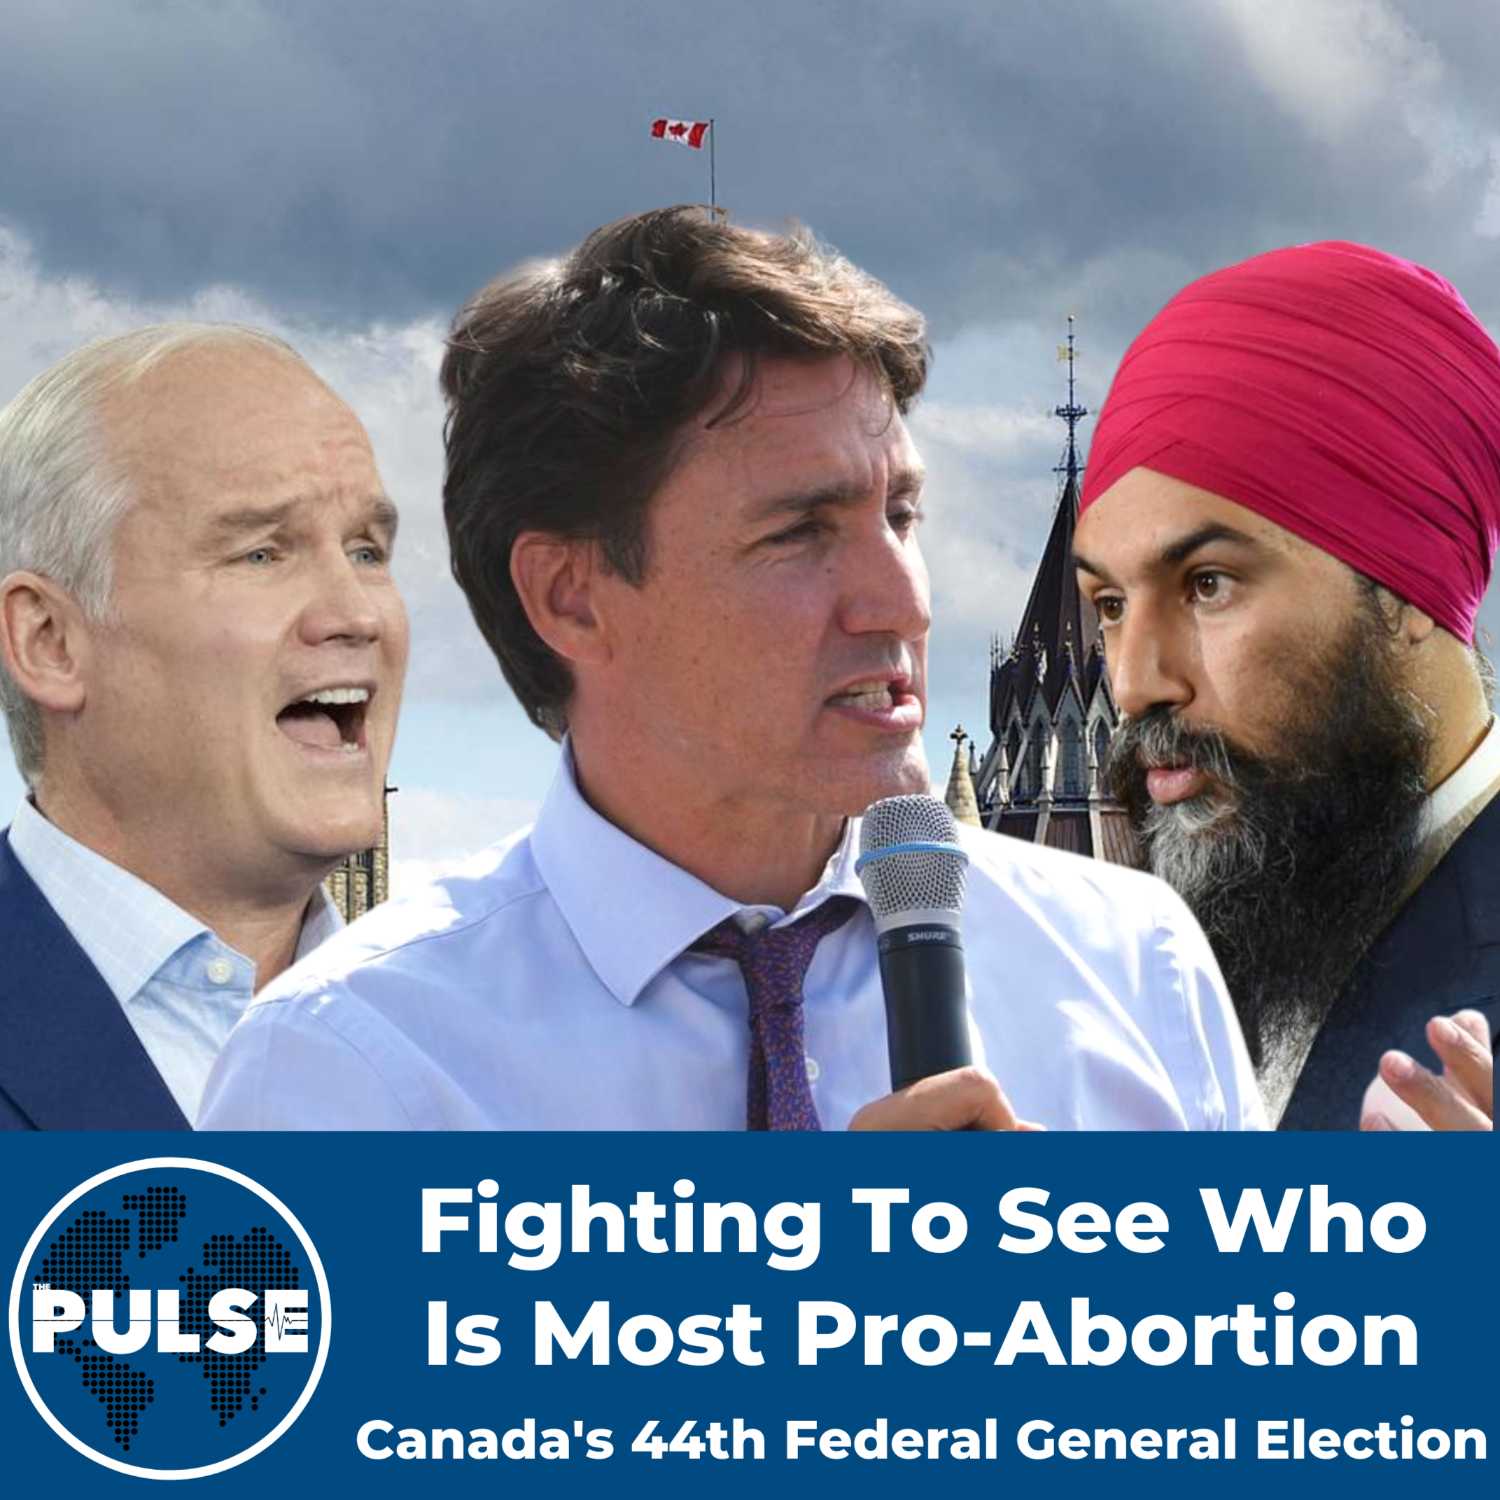 PULSE: Canadian Politicians Trying To Be the Most Pro-Abortion, and other news items